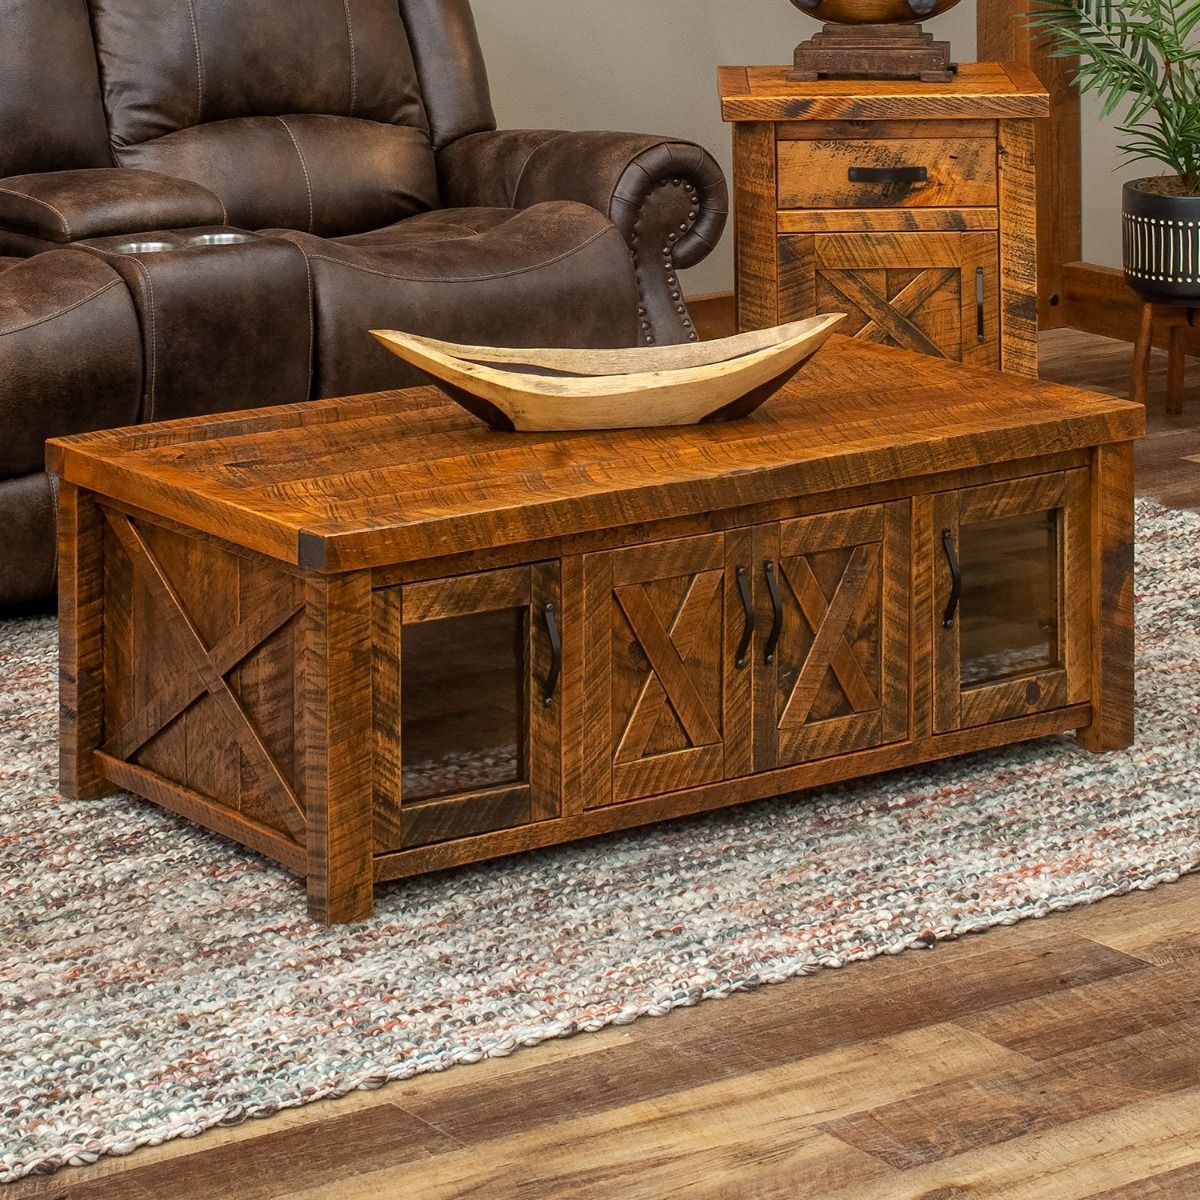 Western Winds Enclosed Coffee Table With 4 Doors Pertaining To Coffee Tables With Storage And Barn Doors (View 3 of 15)